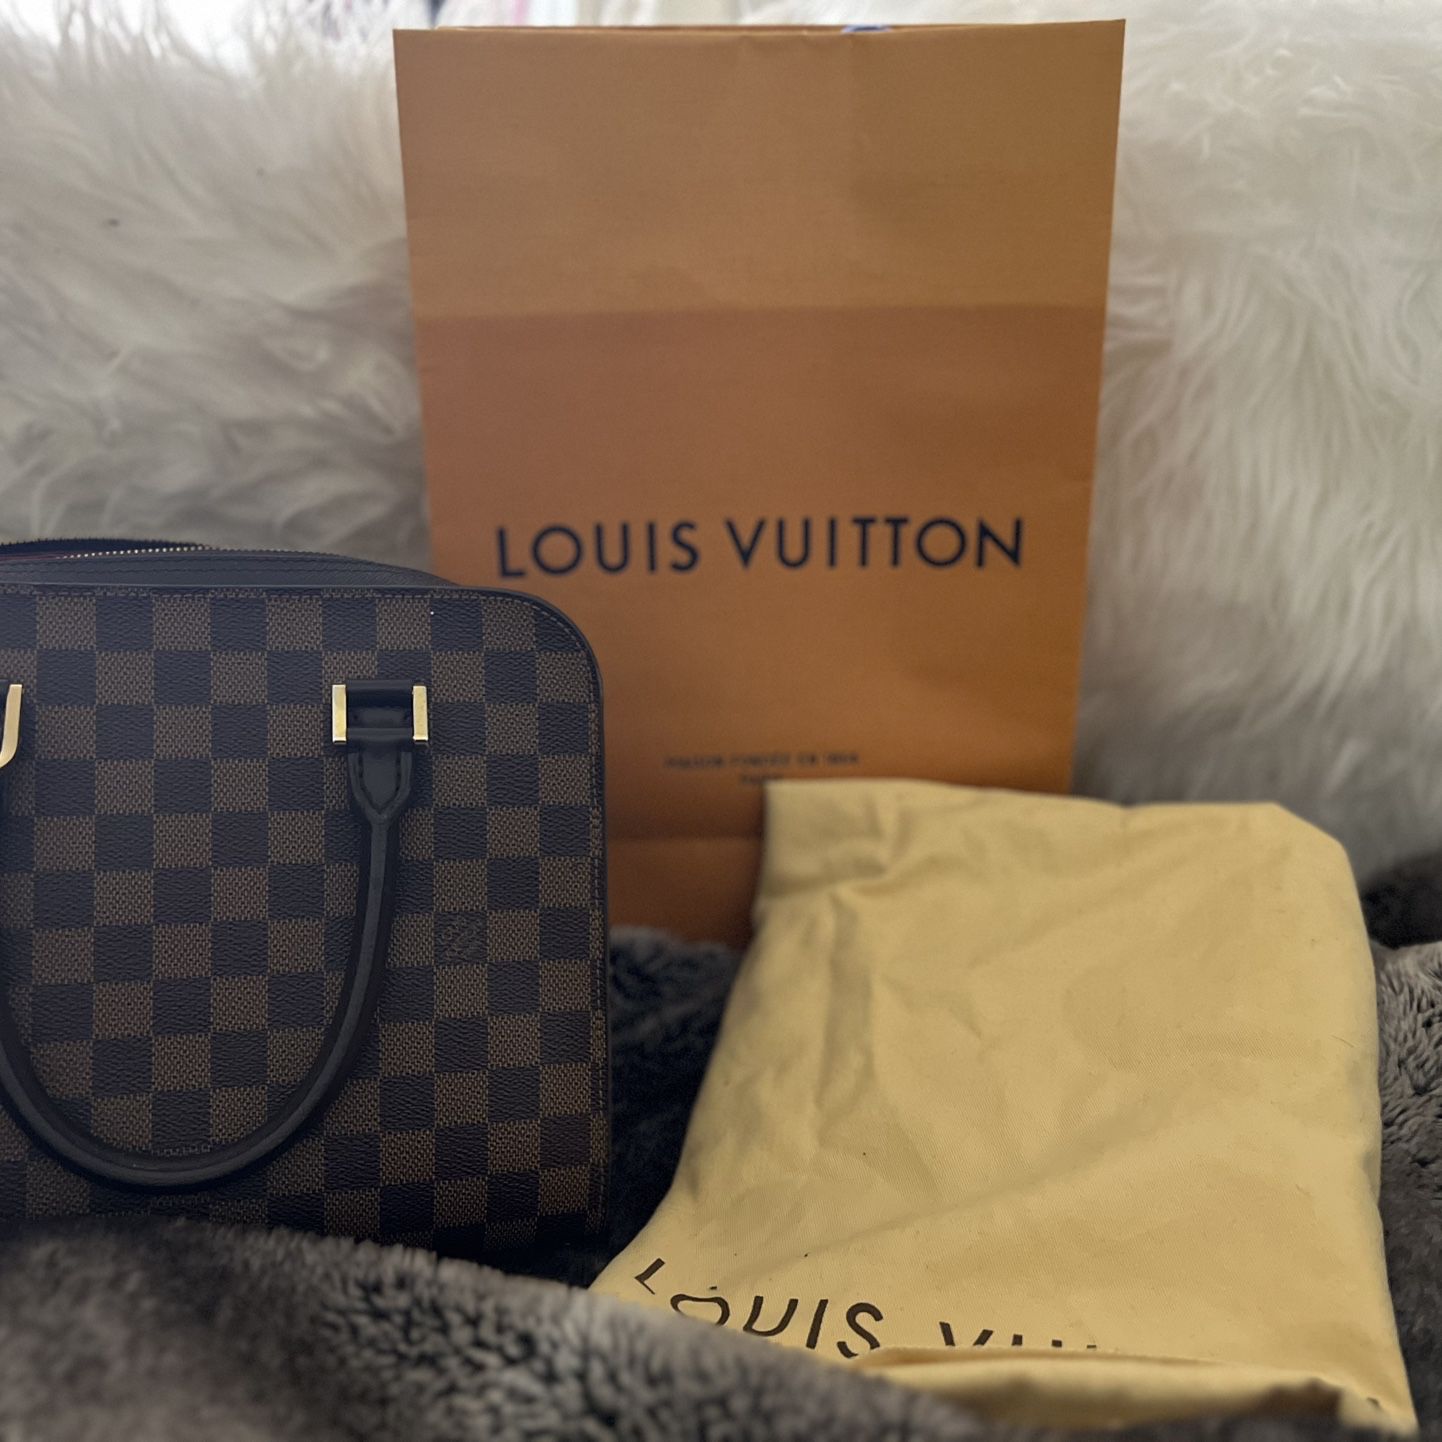 Louis Vuitton Luggage - Authentic! for Sale in Redmond, WA - OfferUp